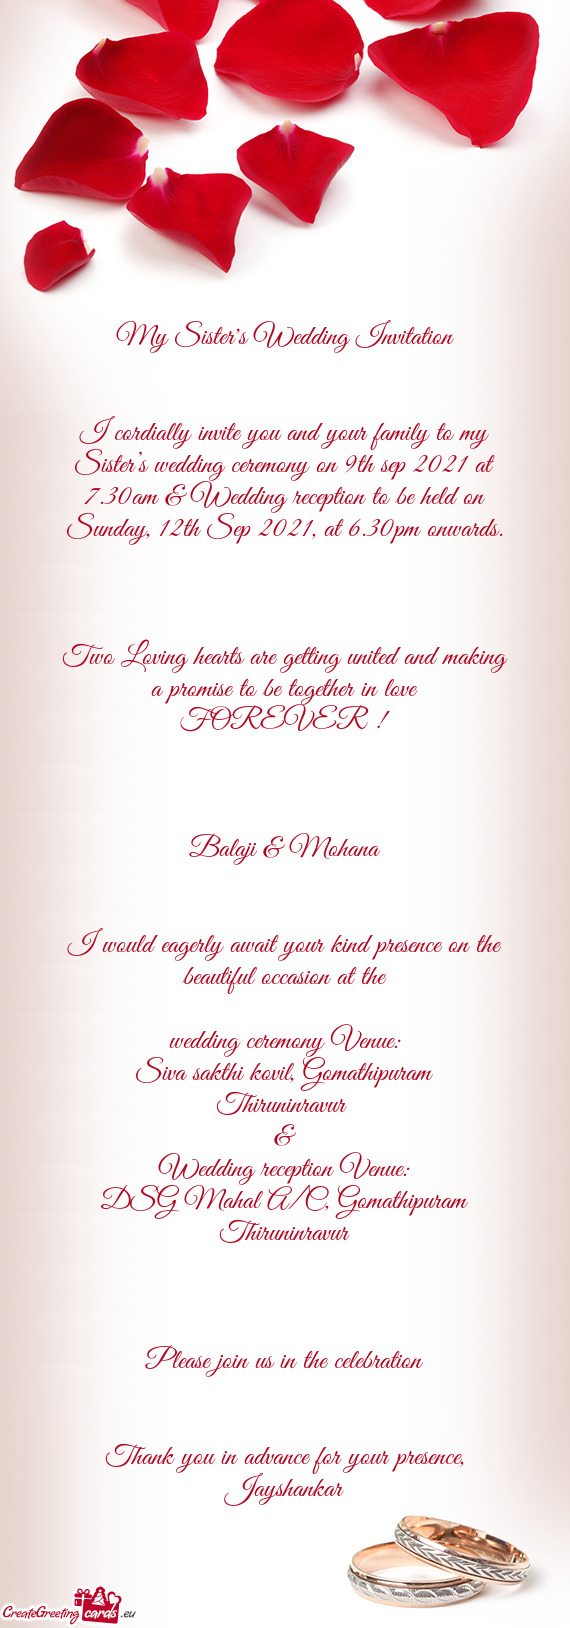 I cordially invite you and your family to my Sister’s wedding ceremony on 9th sep 2021 at 7.30am &